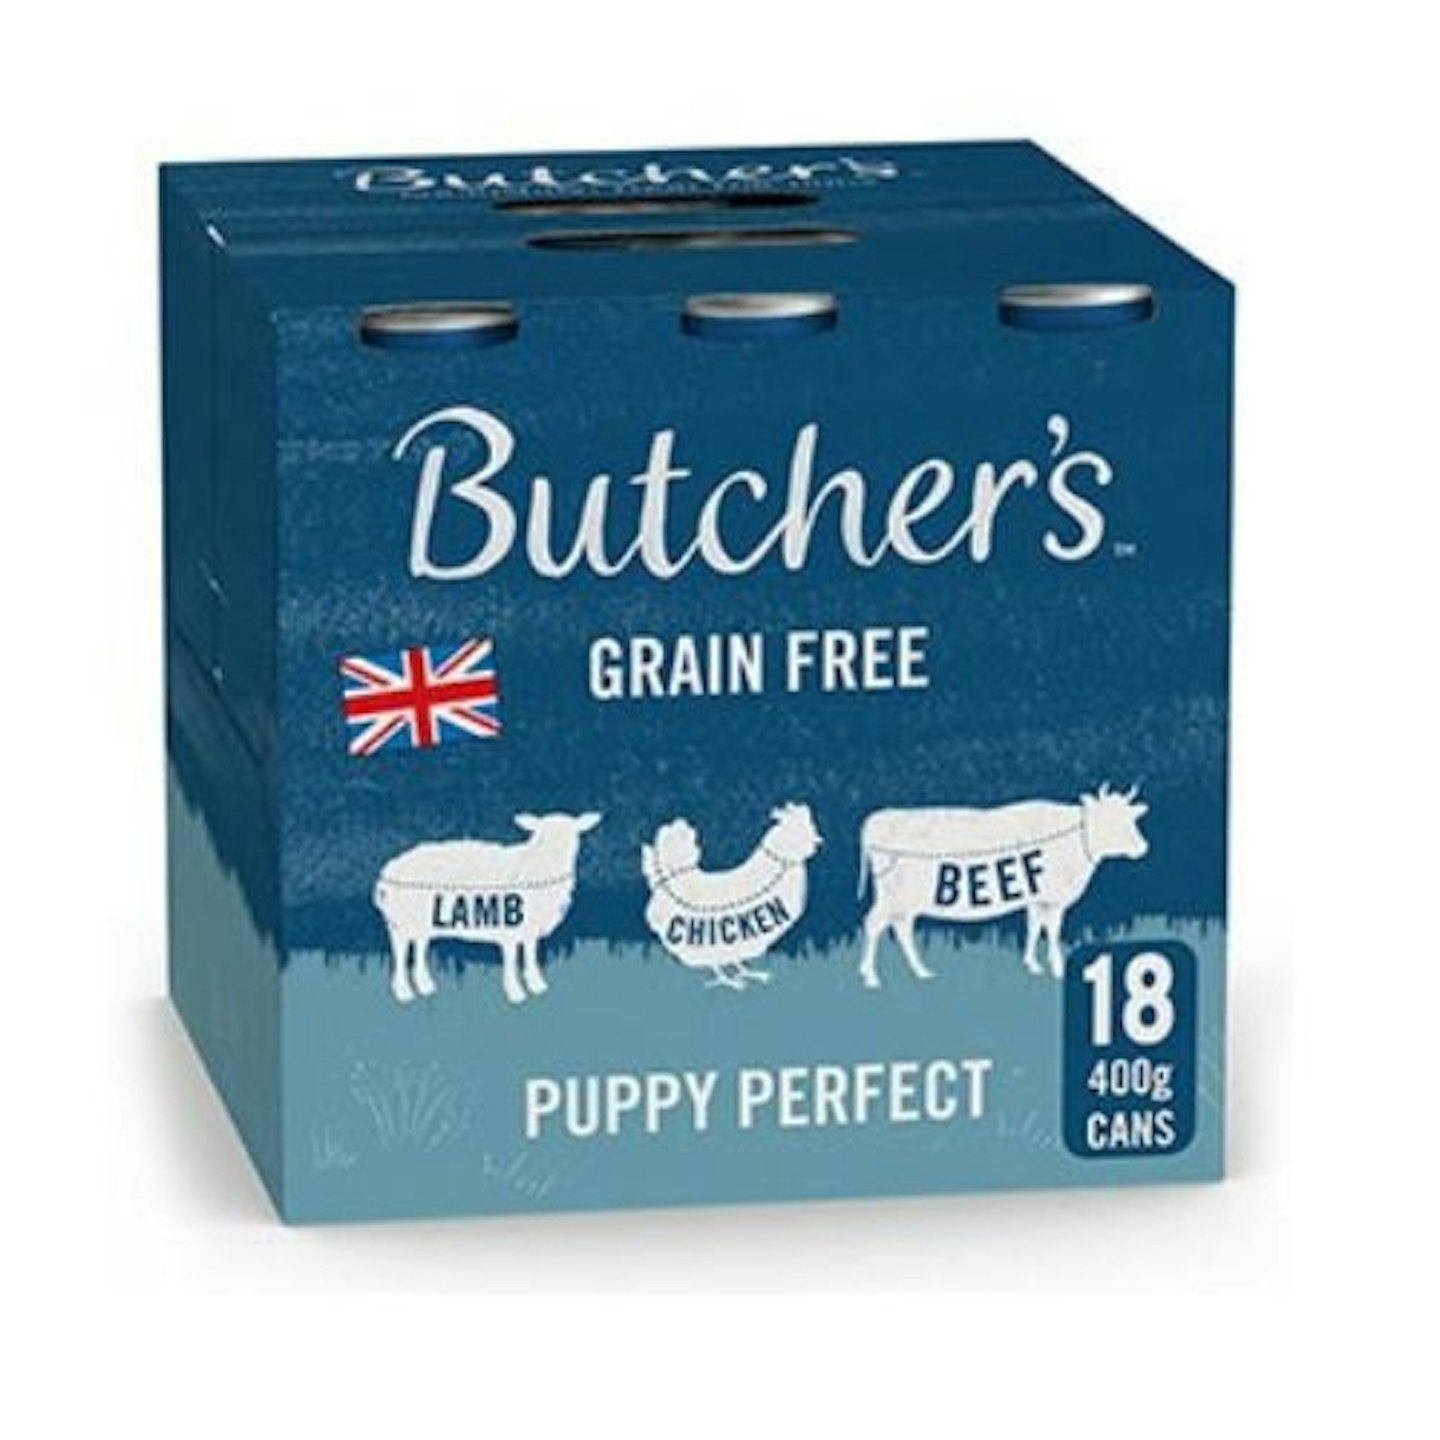 Butcher's Puppy Wet Dog Food Tin Cans